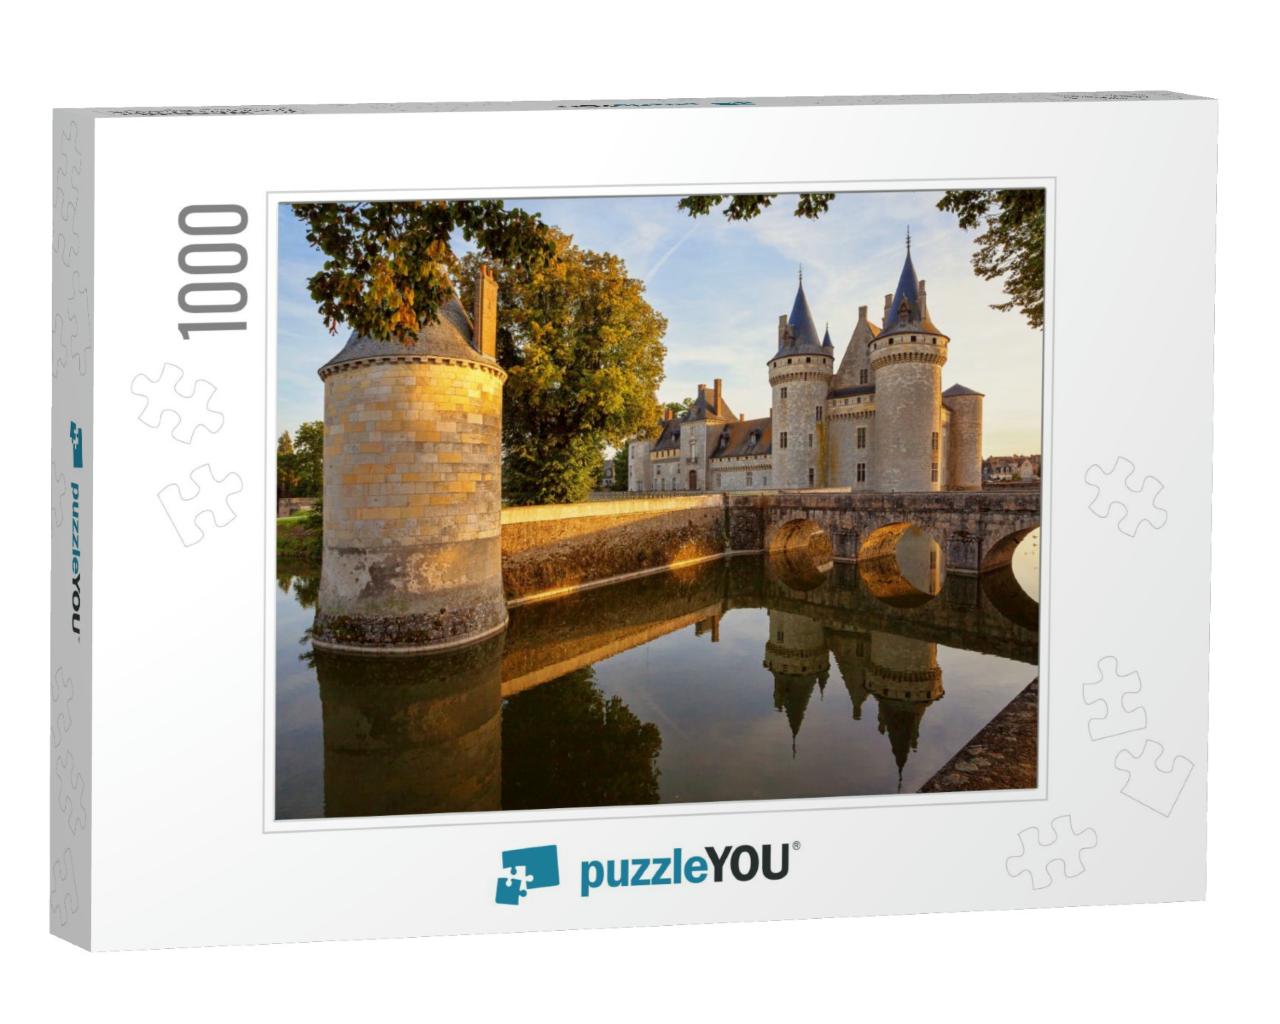 Sully-Sur-Loire. France. Chateau of the Loire Valley... Jigsaw Puzzle with 1000 pieces